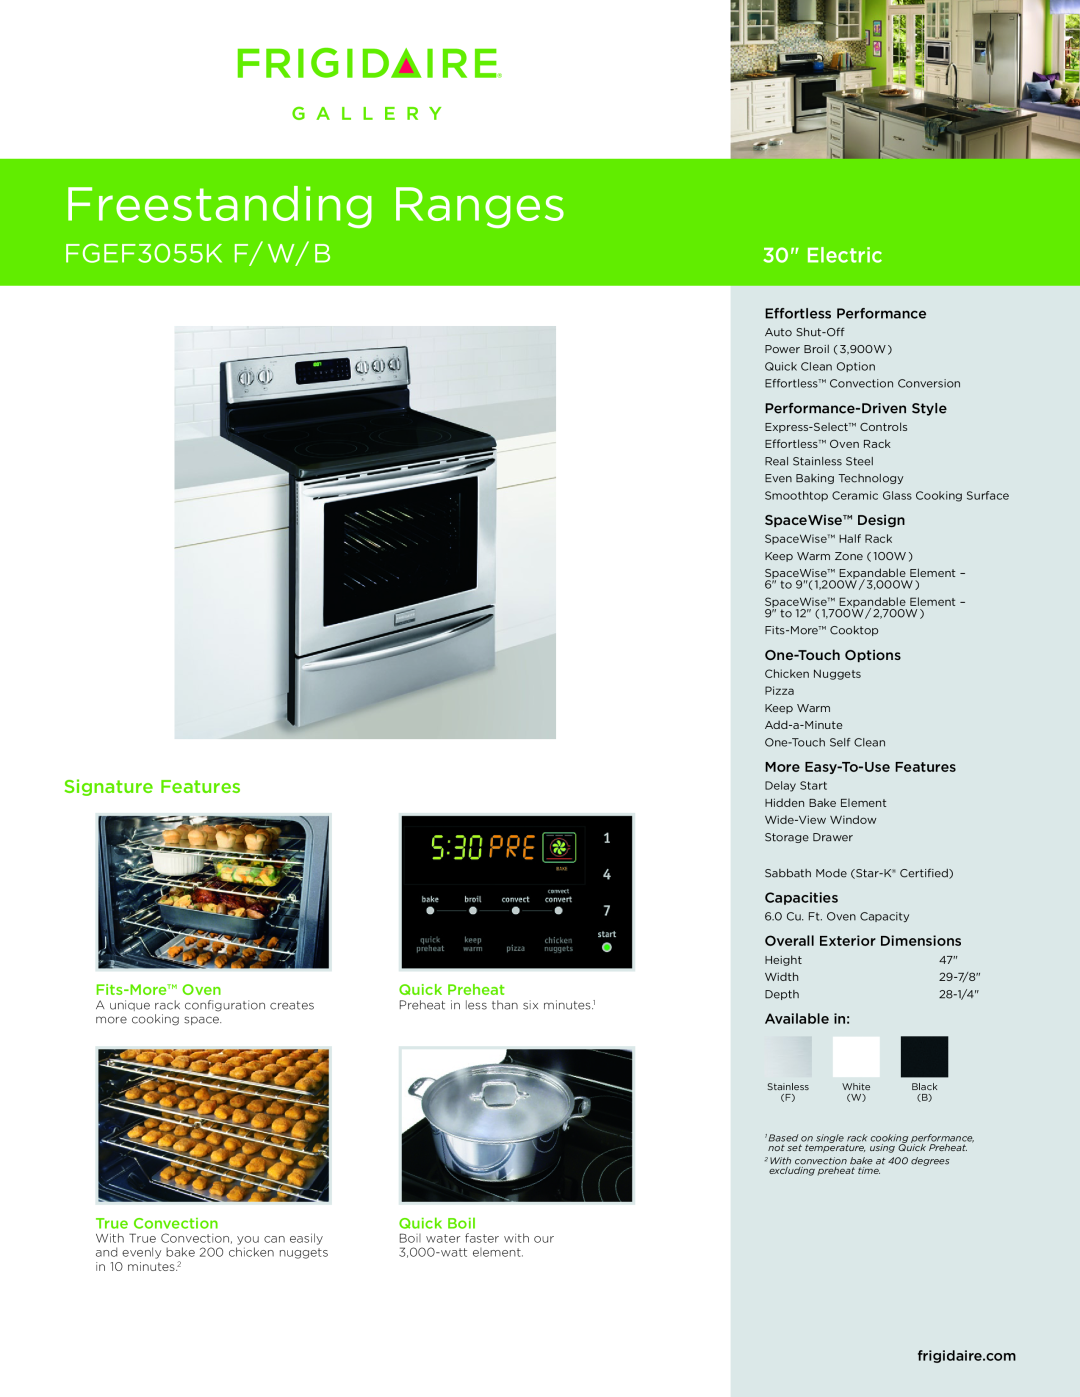 Frigidaire FGEF3055KF dimensions Fits-MoreOven, Quick Preheat, True Convection, Quick Boil, Effortless Performance 